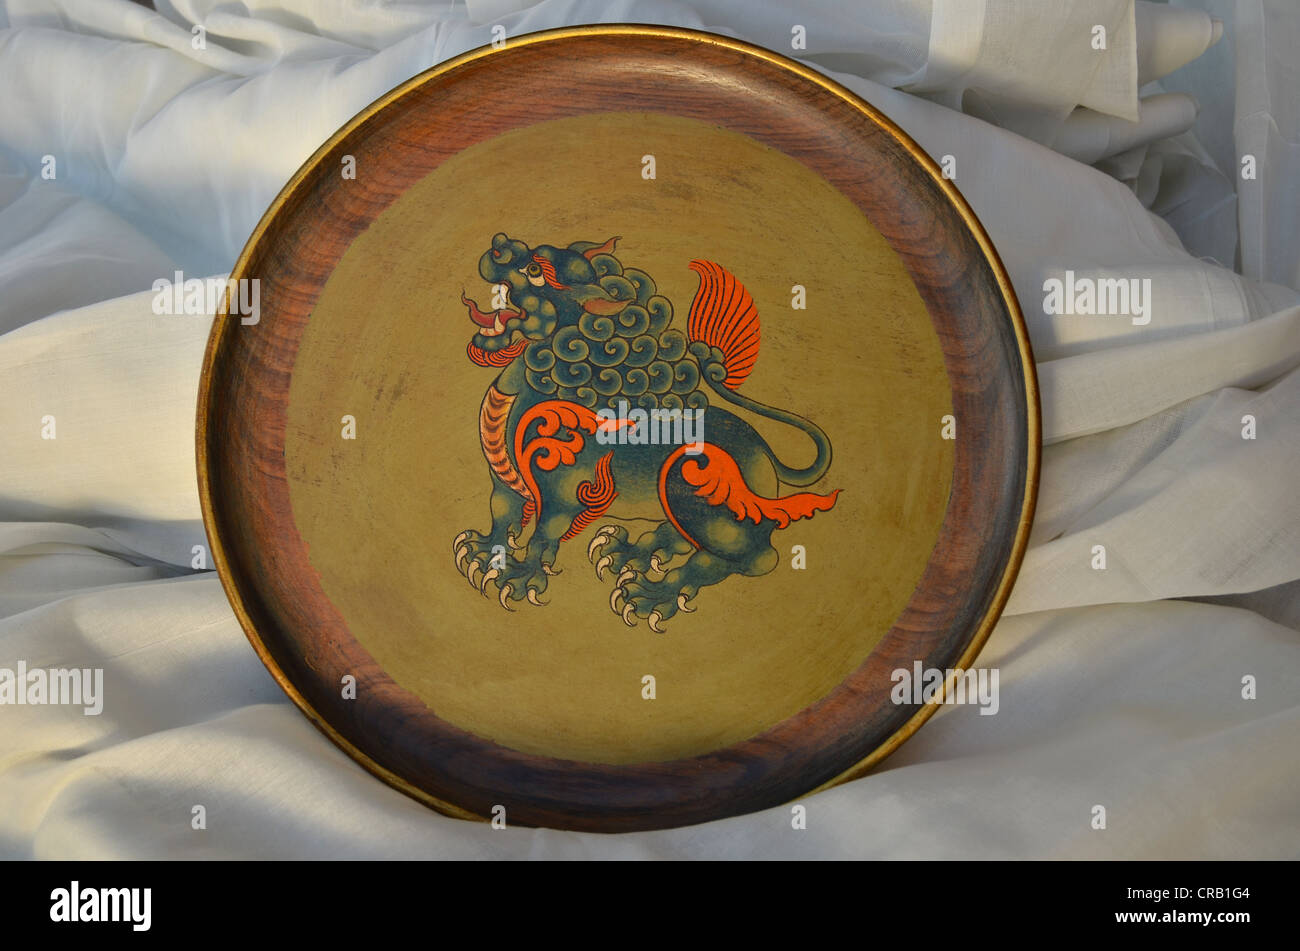 Tibetan handicrafts, Tibetan wooden plate with lacquer painting, depicting a mystical dragon, traditional Tibetan wood art Stock Photo